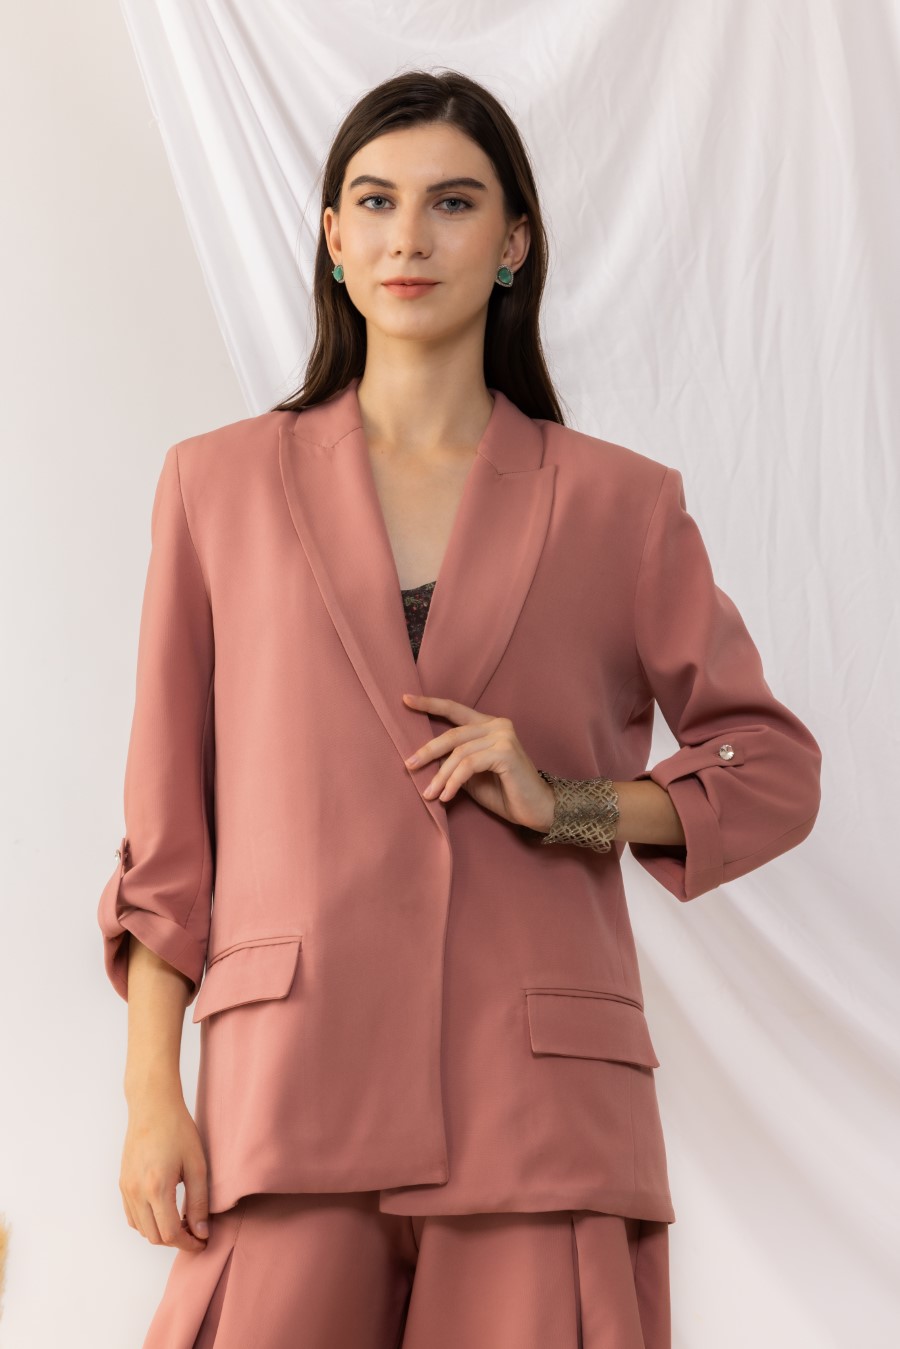 Coral Rose Open Blazer With Side Flap Pockets And Pull Up Sleeves